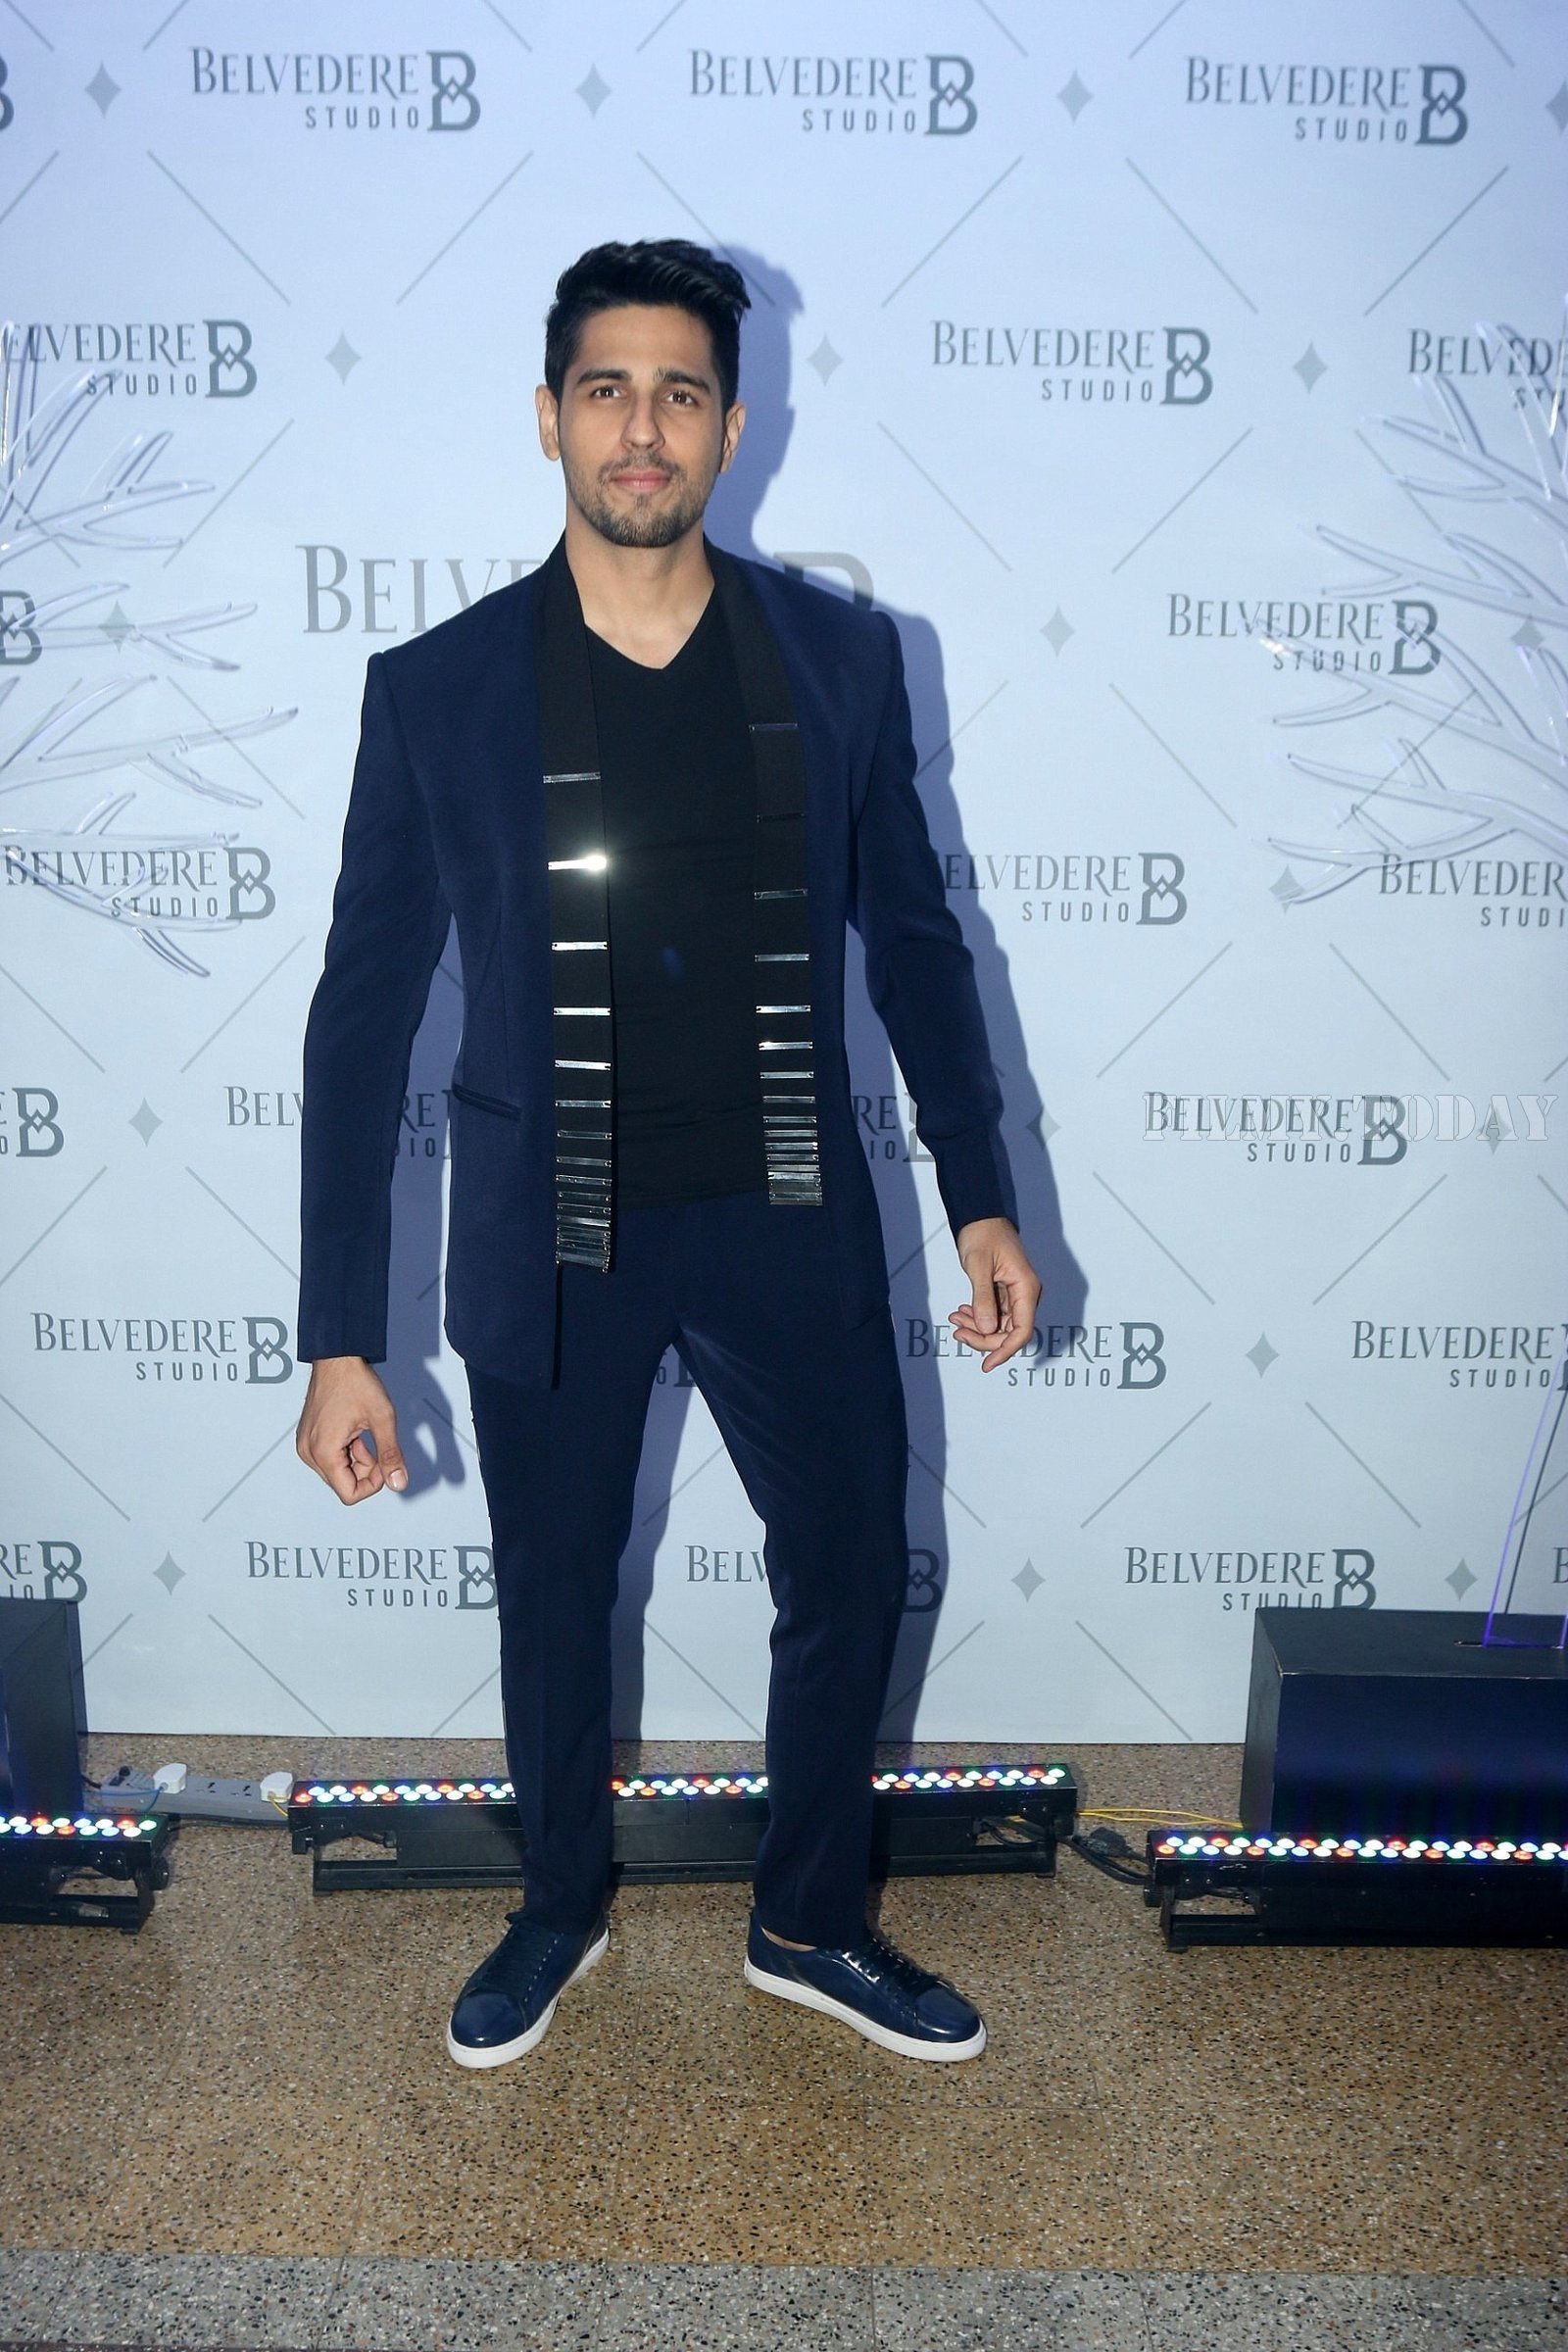 Sidharth Malhotra - Photos: Bollywood Celebs At Belvedere Studio | Picture 1573605